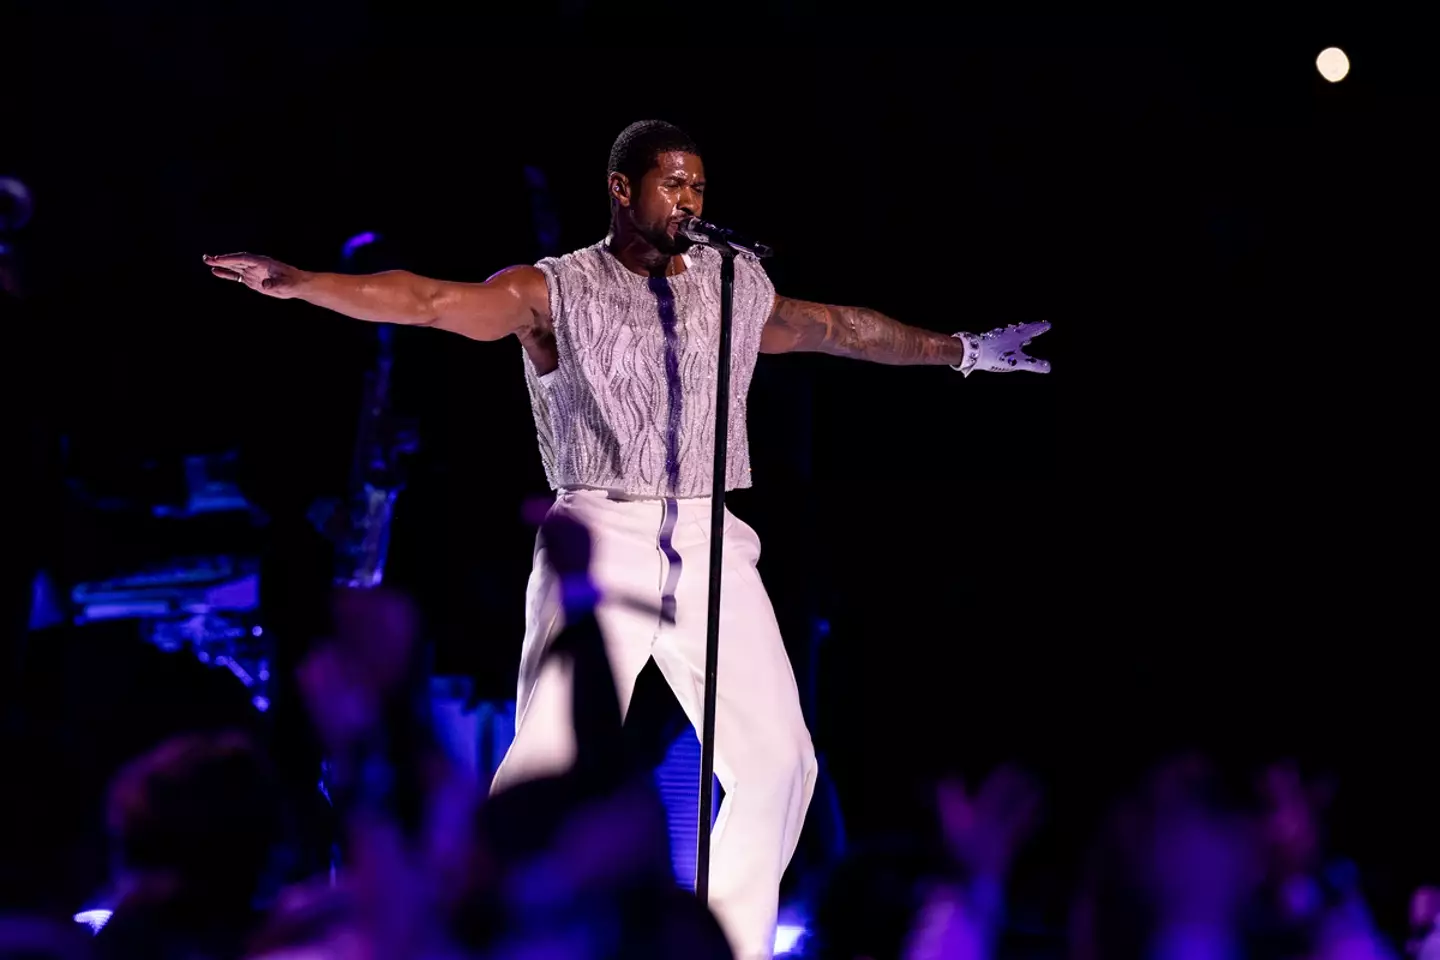 Usher was this year's Super Bowl halftime performer.